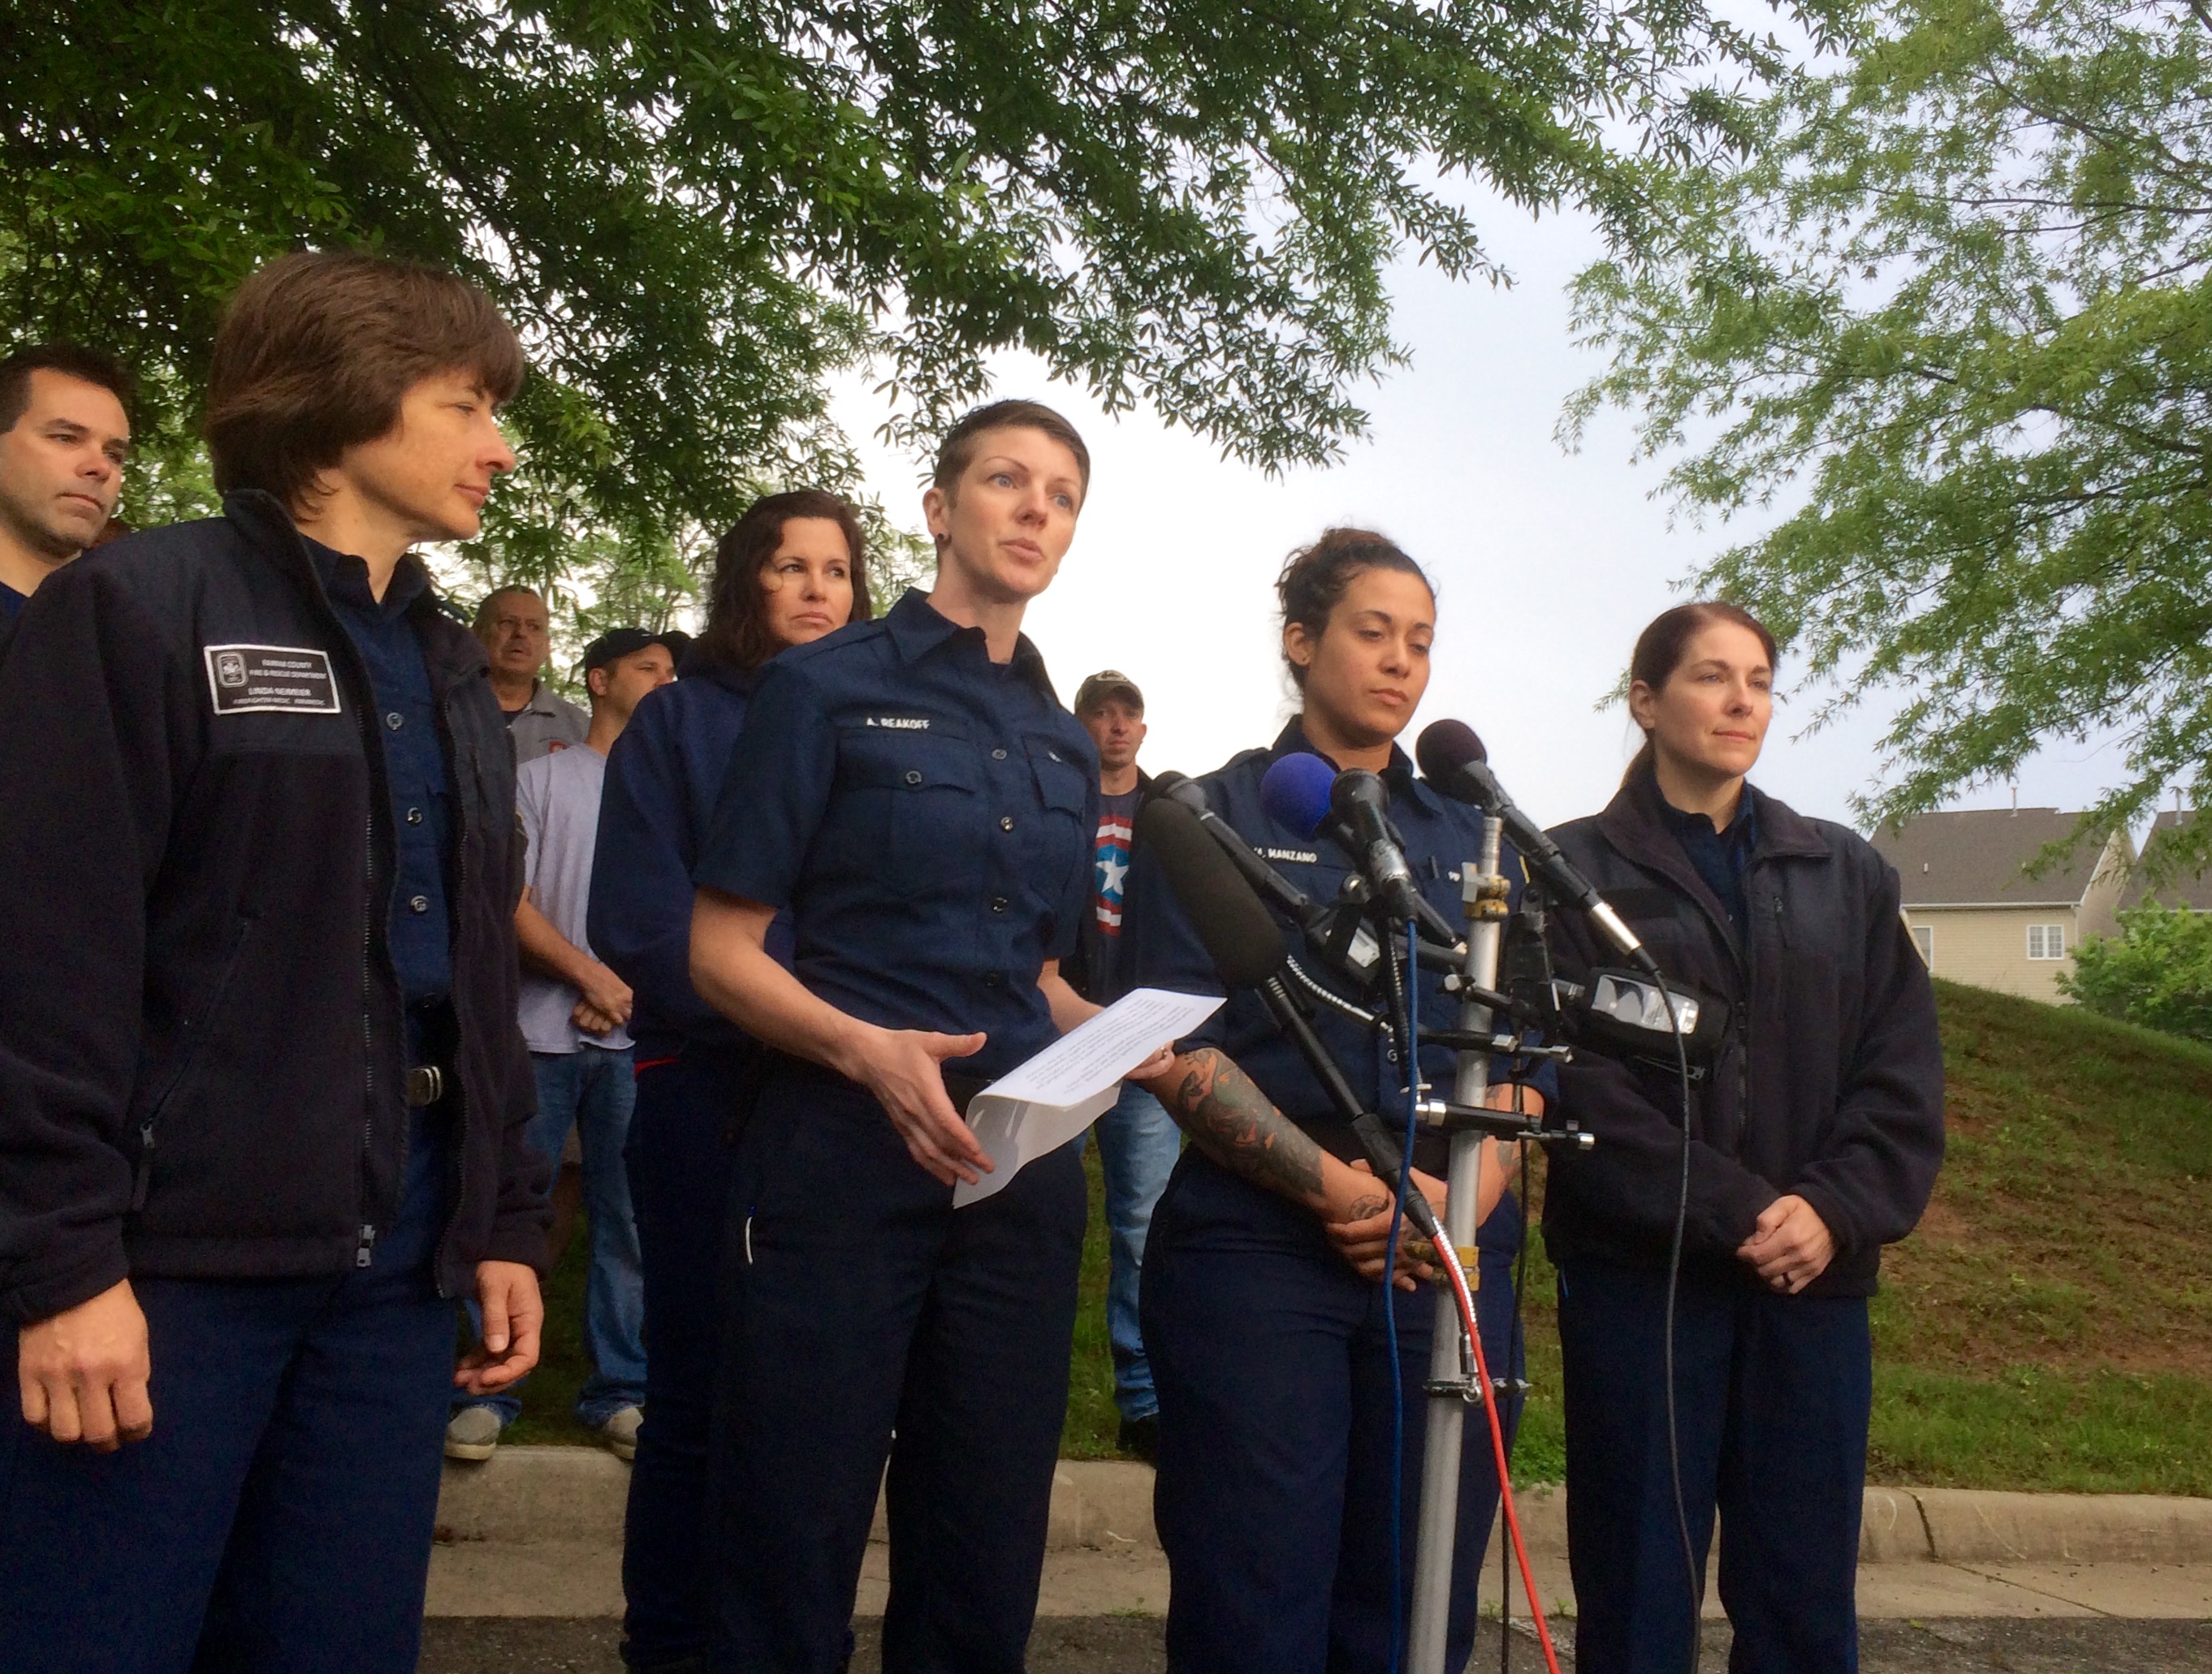 Female firefighters rebut claims of harassment in Fairfax Co.